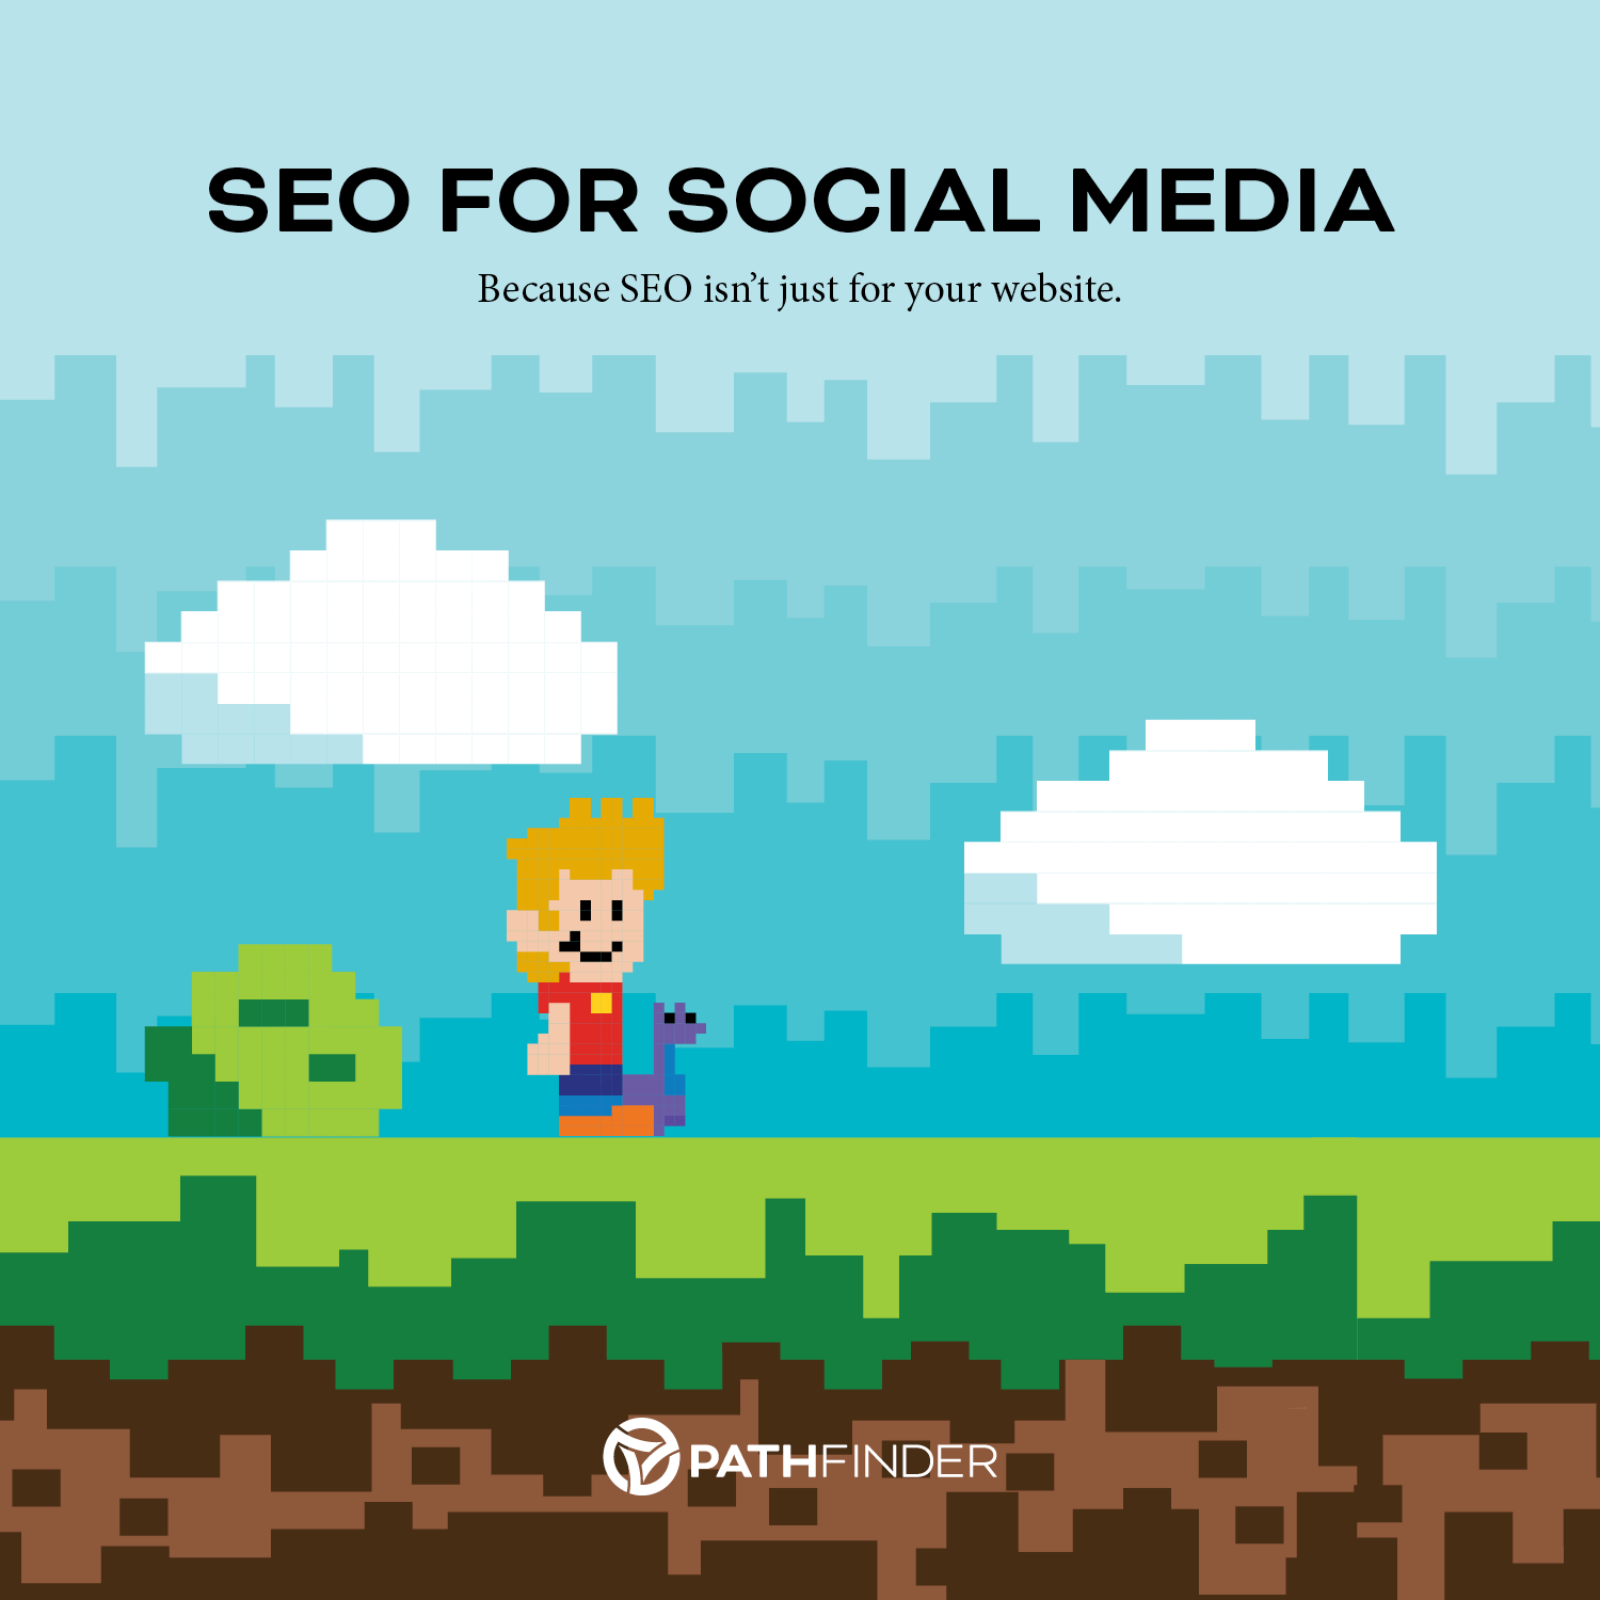 Are SEO Best Practices Neglected in Your Social Media Marketing?